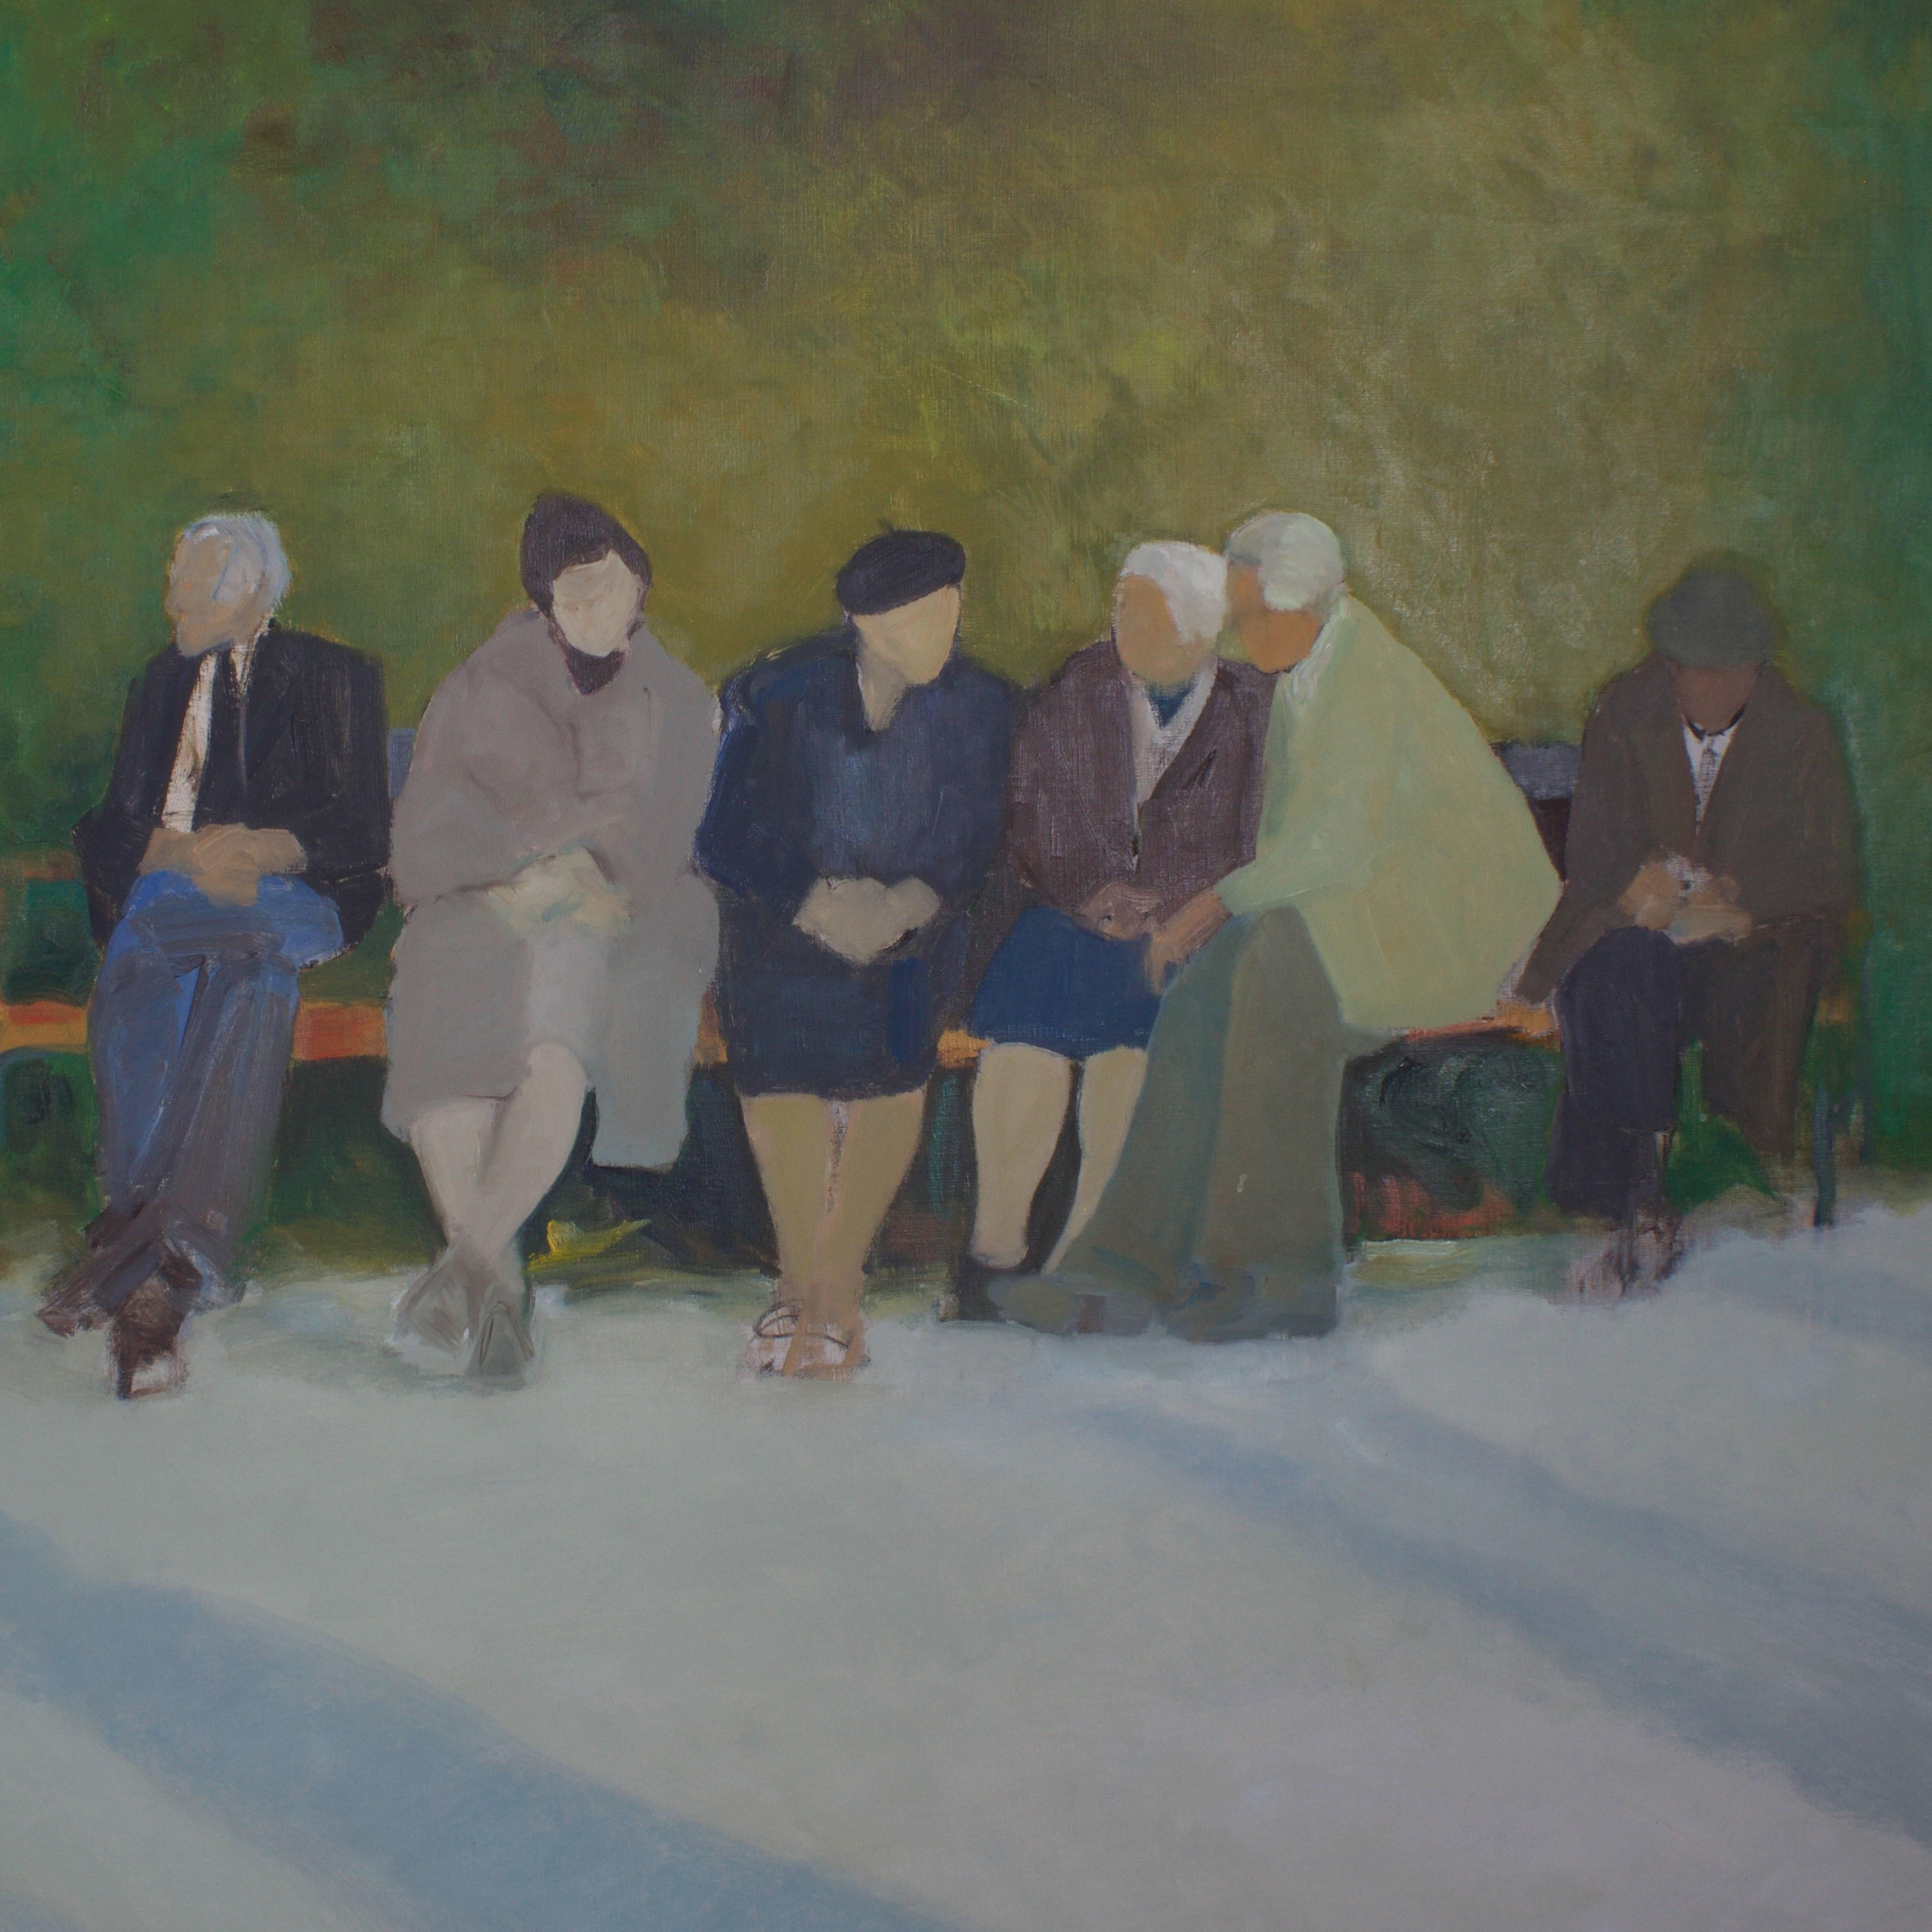 Cryptic acrylic on canvas painting of a moment in time on a park bench, by Paul Berger. The shadows in the foreground suggest passersby and the implied faces and postures of the bench people suggest a social interaction. Presented in its original